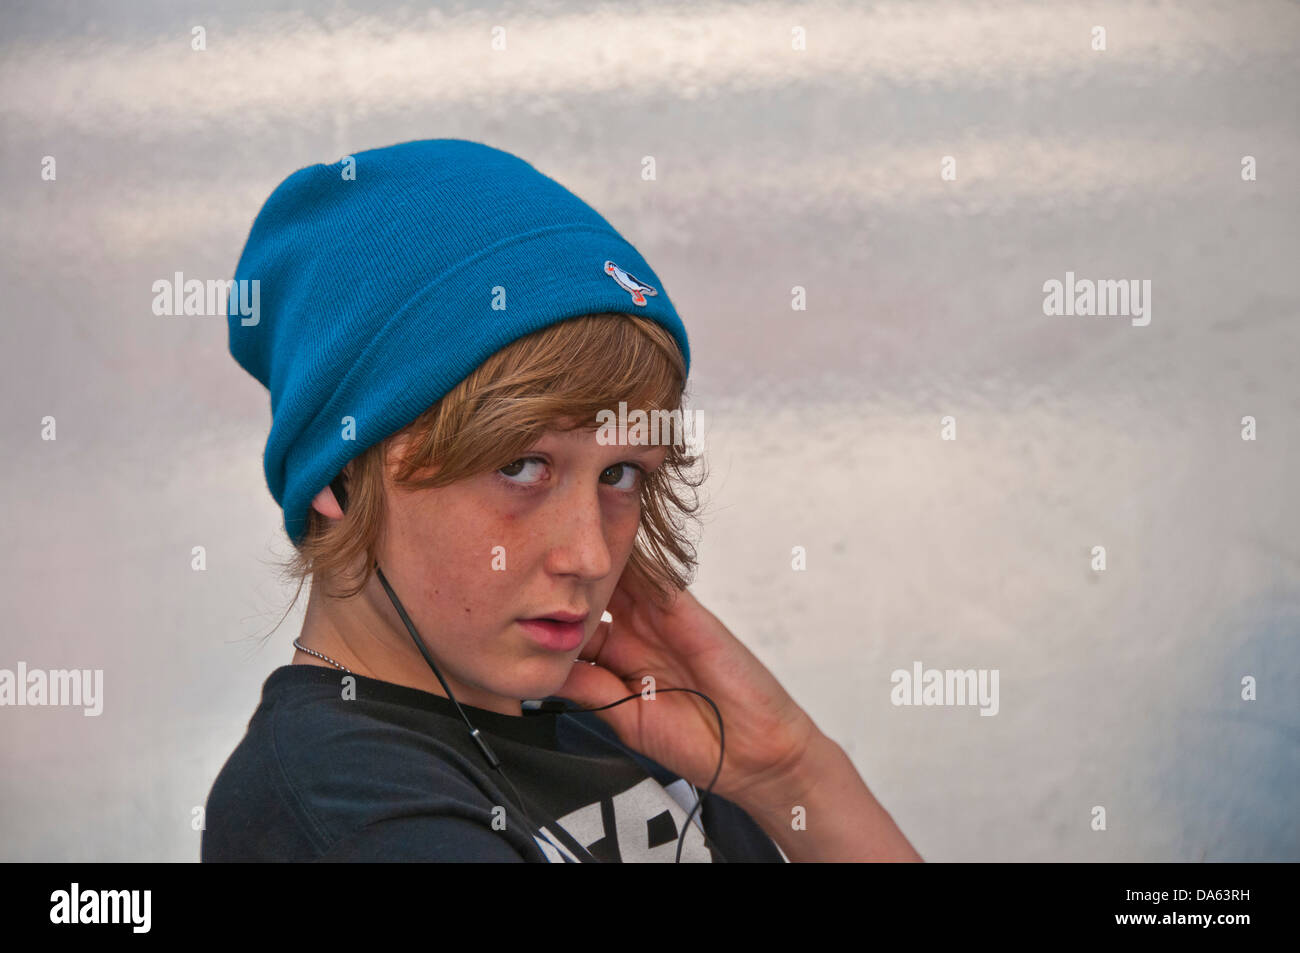 Look, Glance, cap, hat, Portrait, teenager, 12-year-old, boy, Germany, Europe Stock Photo